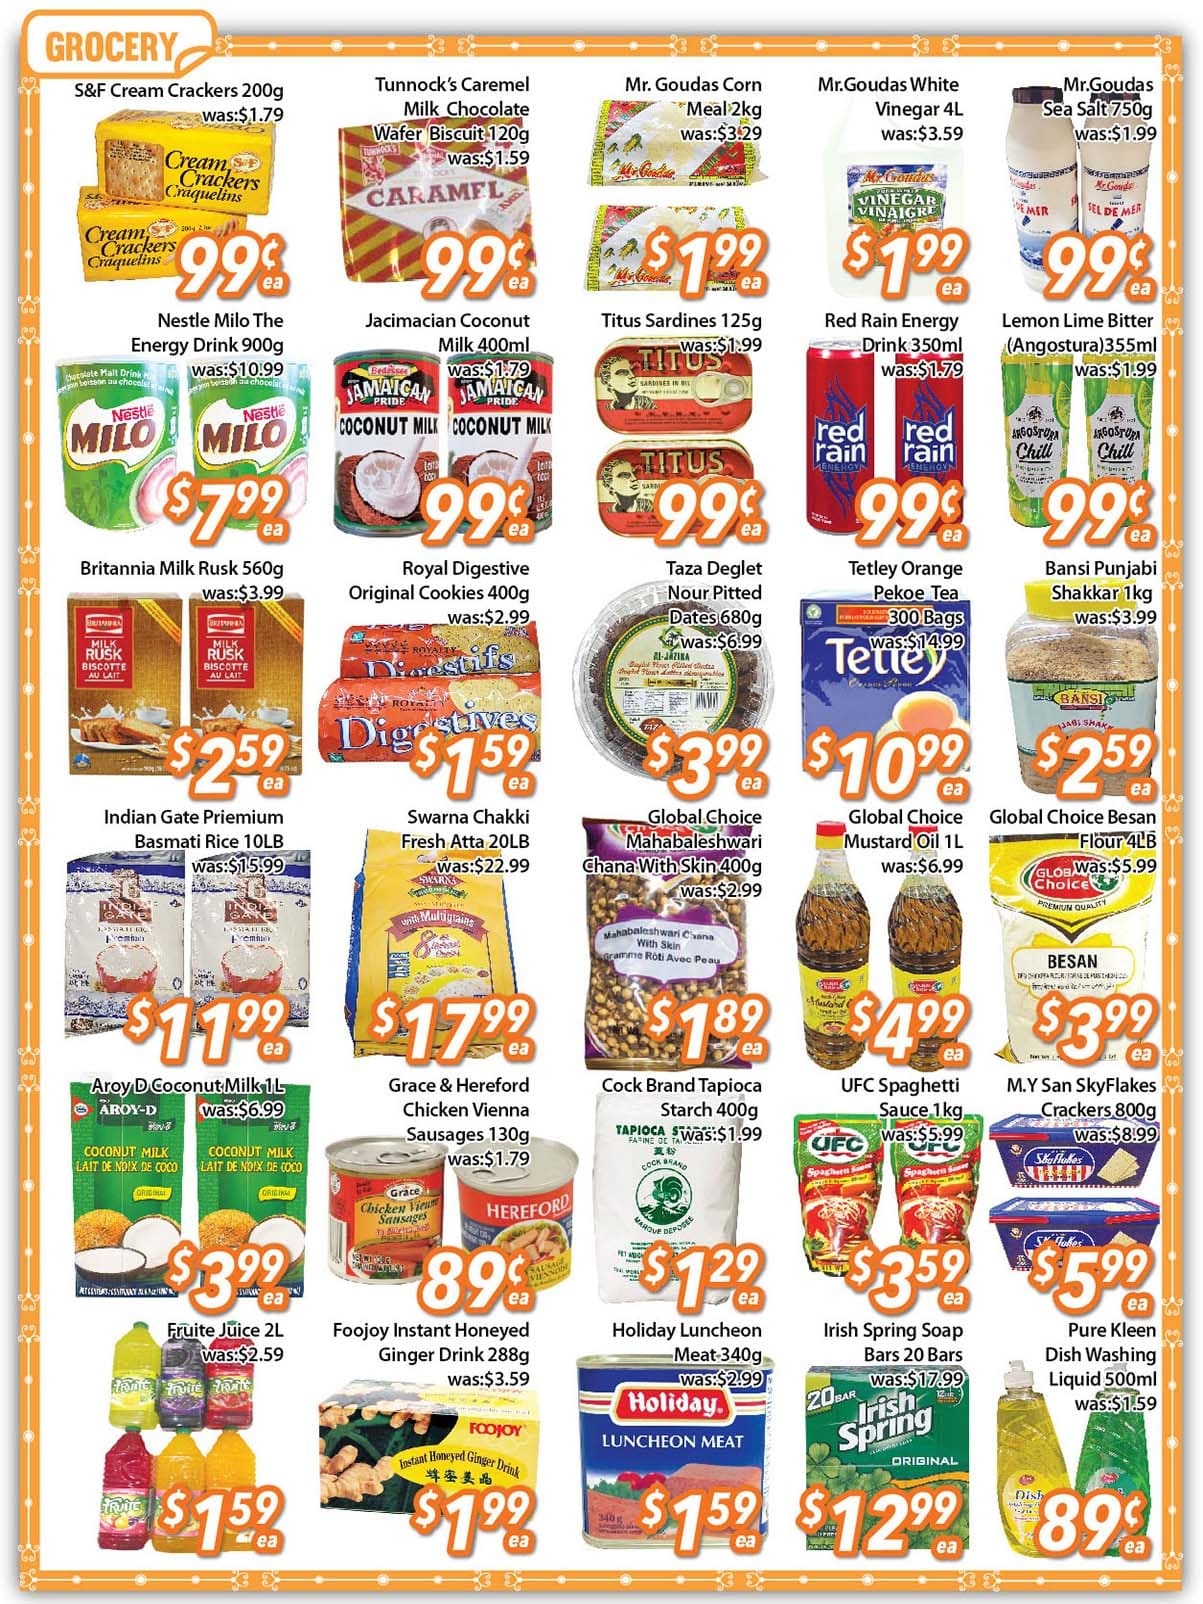 Ample Food Market - Brampton Store - Weekly Flyer Specials - Page 3